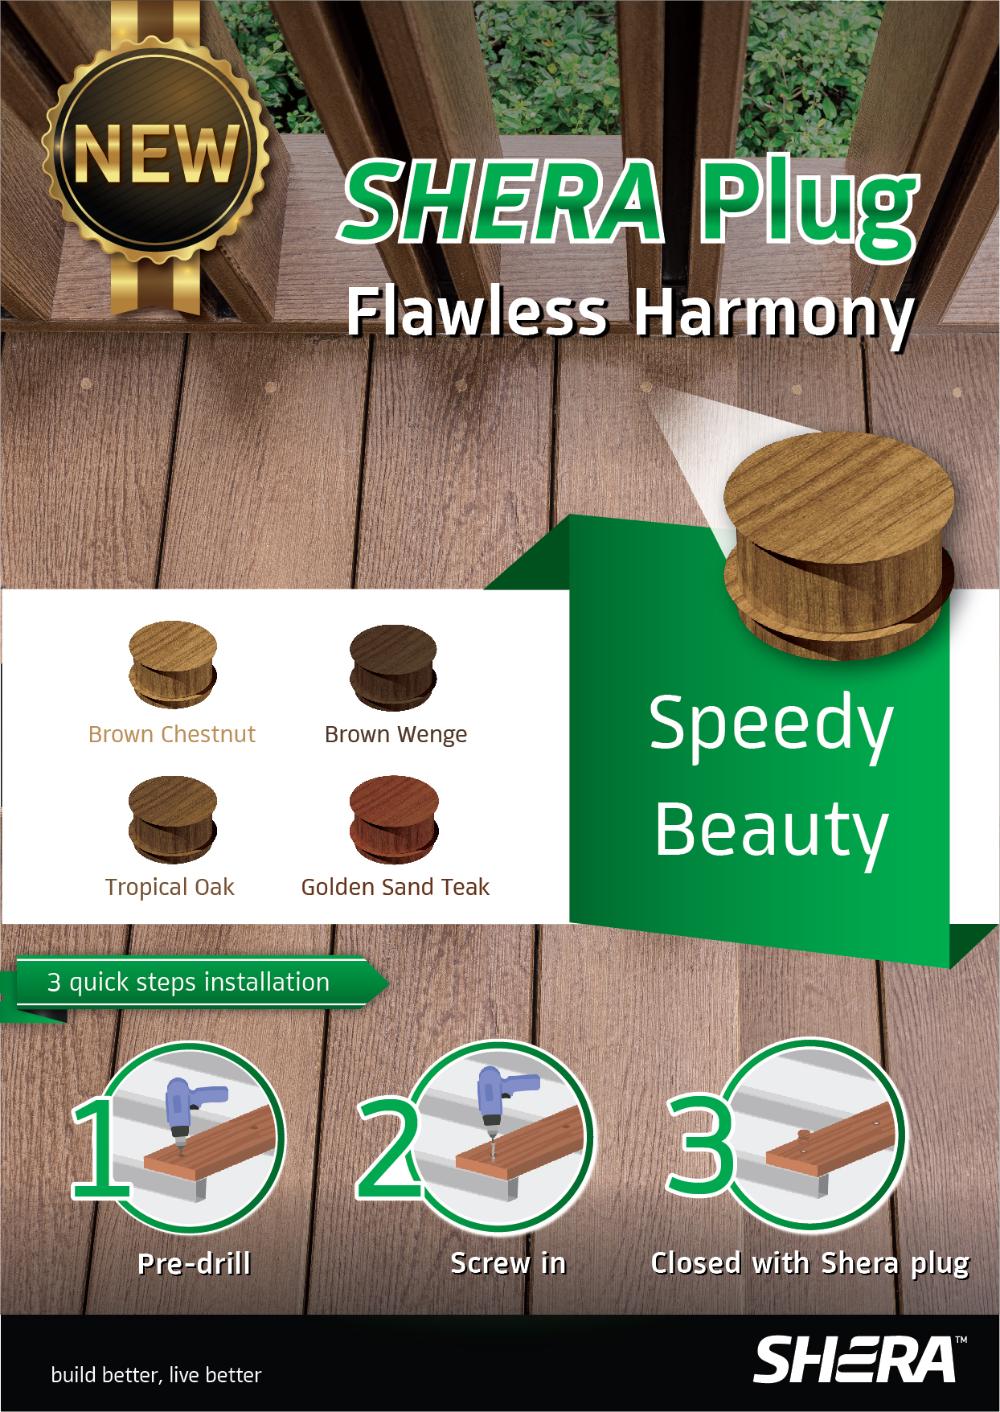 SHERA Decking Plugs for a Seamless Decking Solution